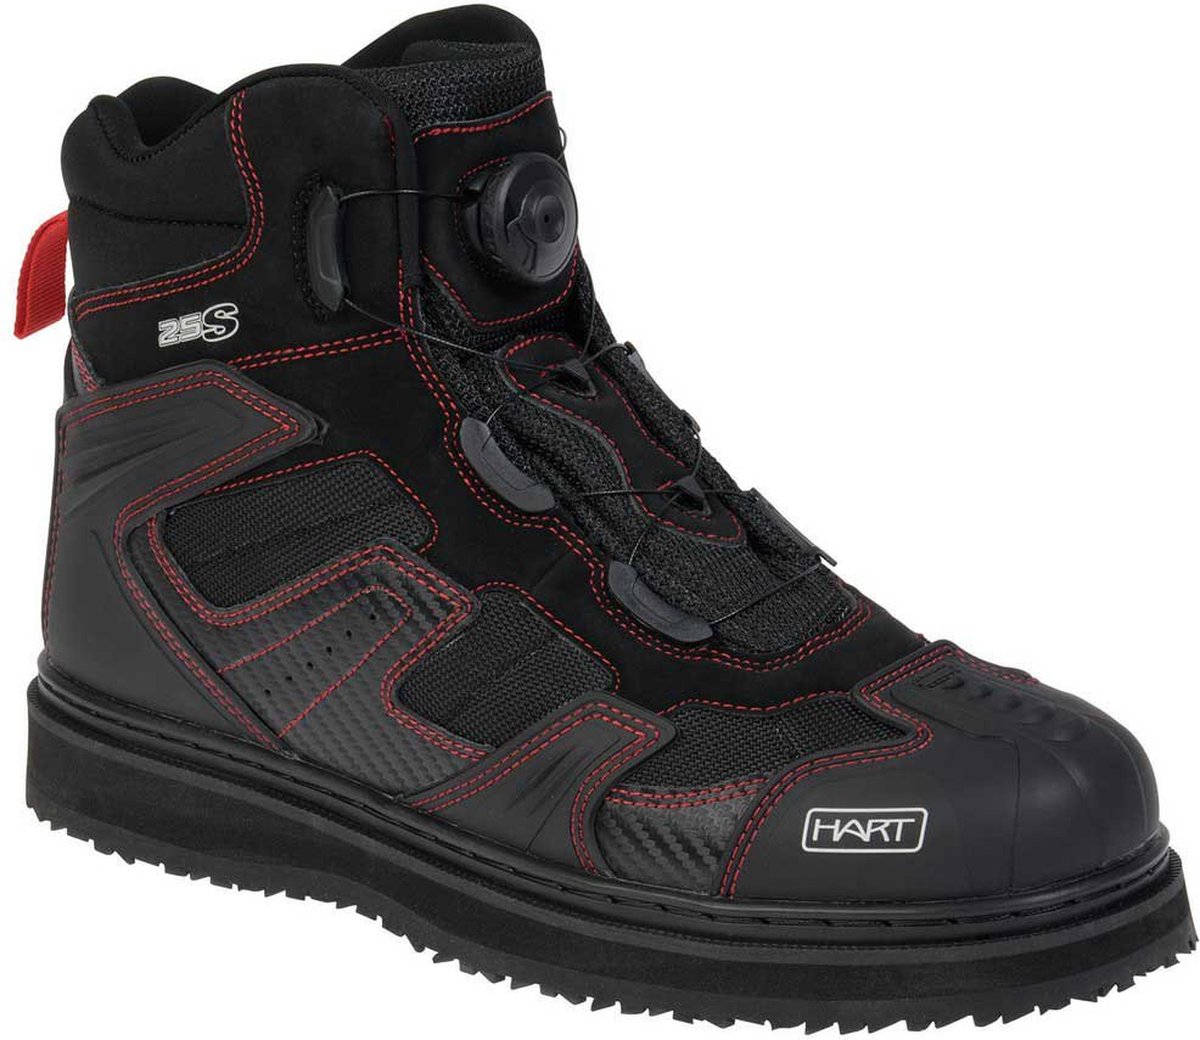 Hart 25s pro wading boots | maat: 44/45